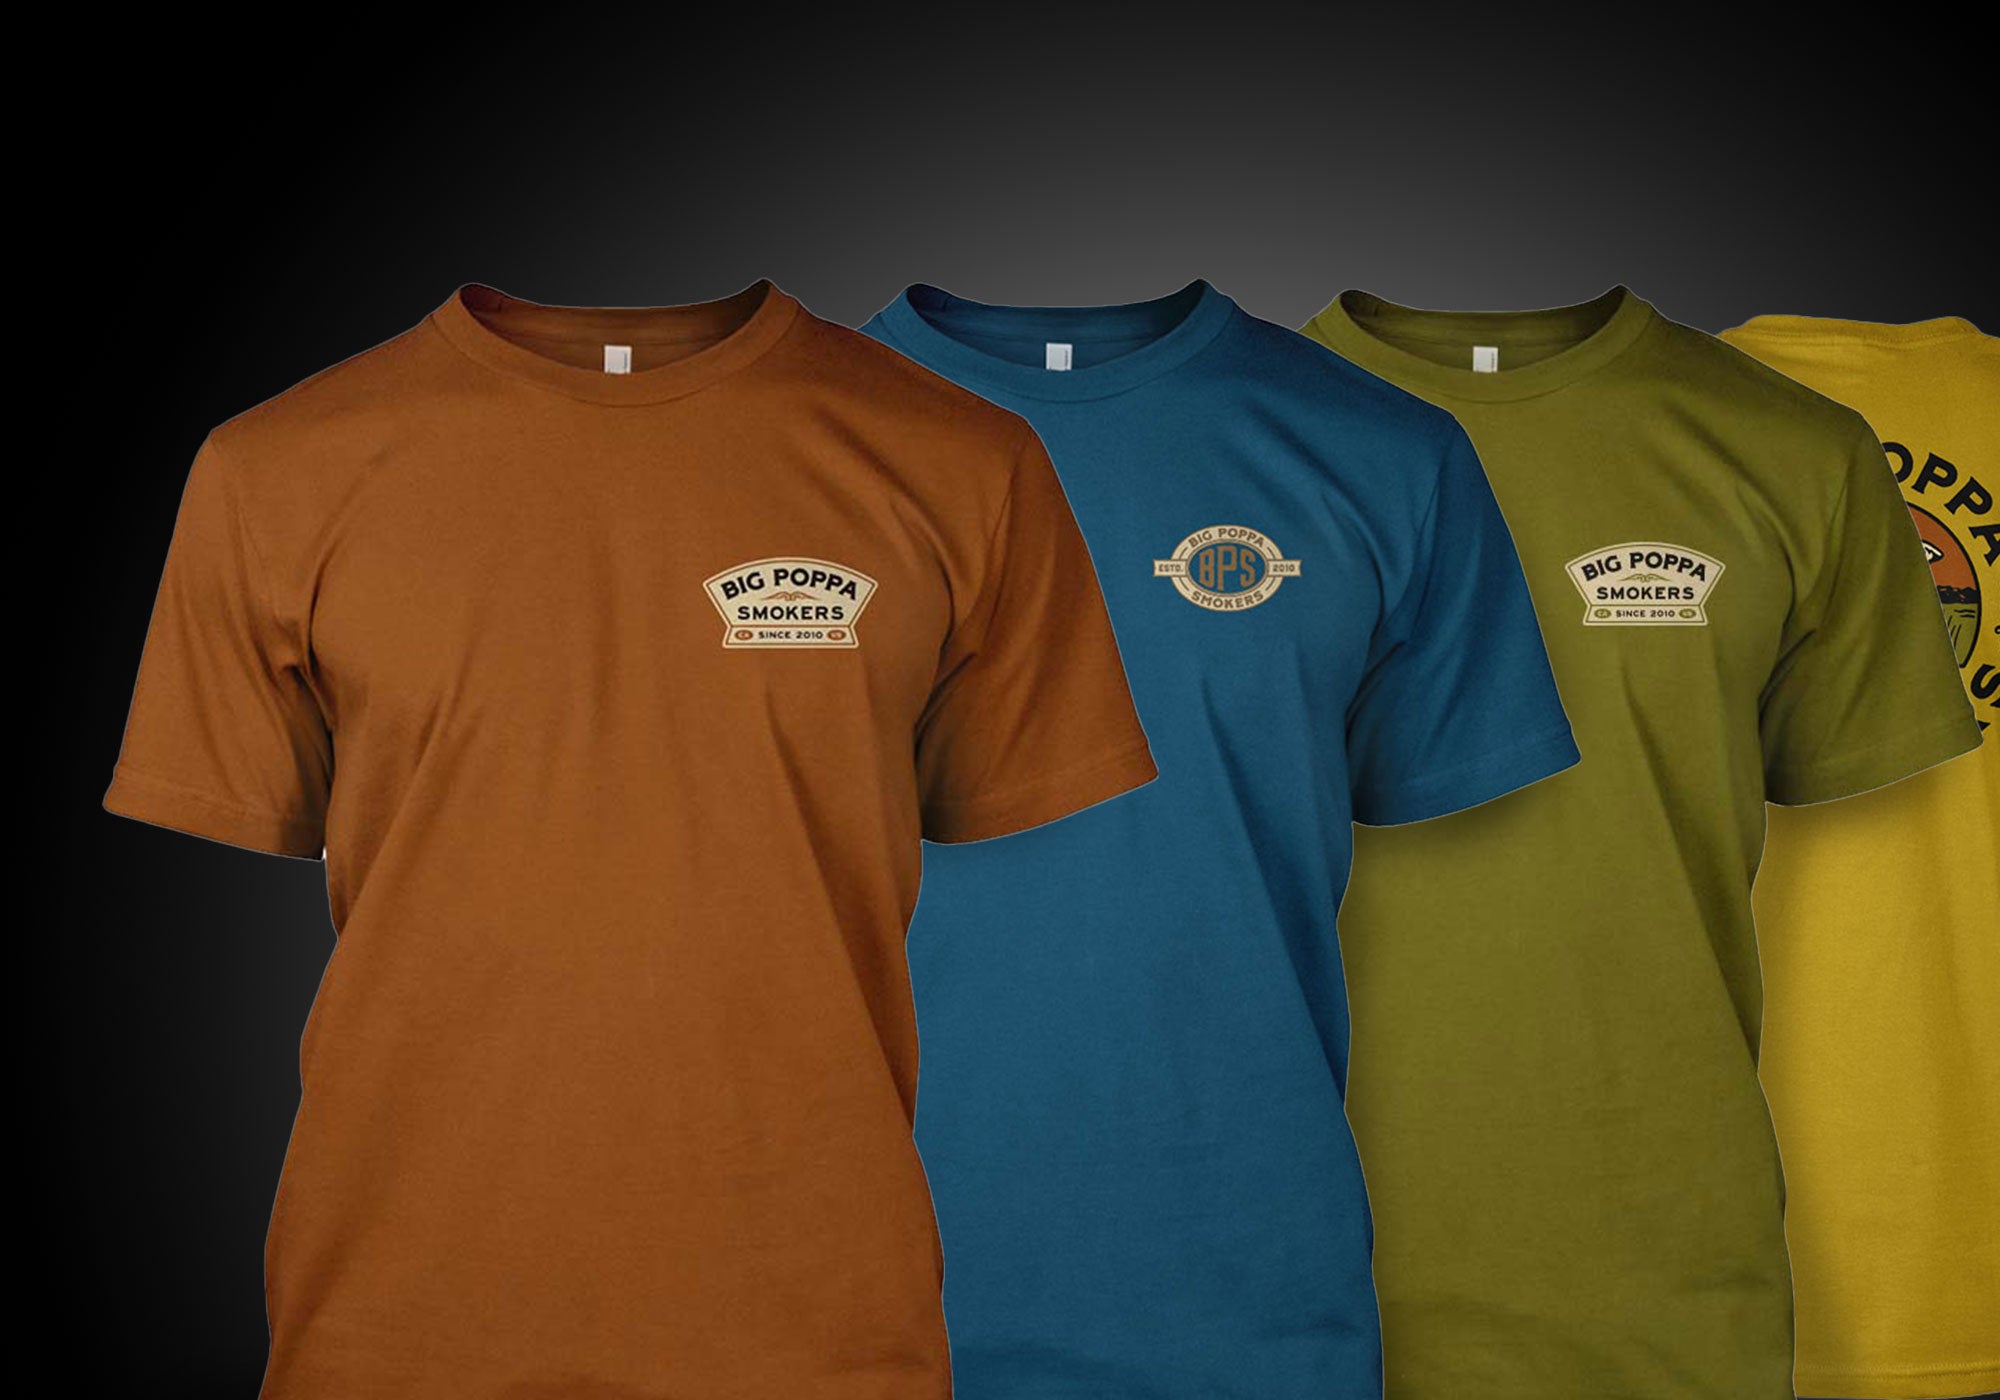 Series of Big Poppa Smokers short sleeve t-shirts in orange, blue, green and yellow.